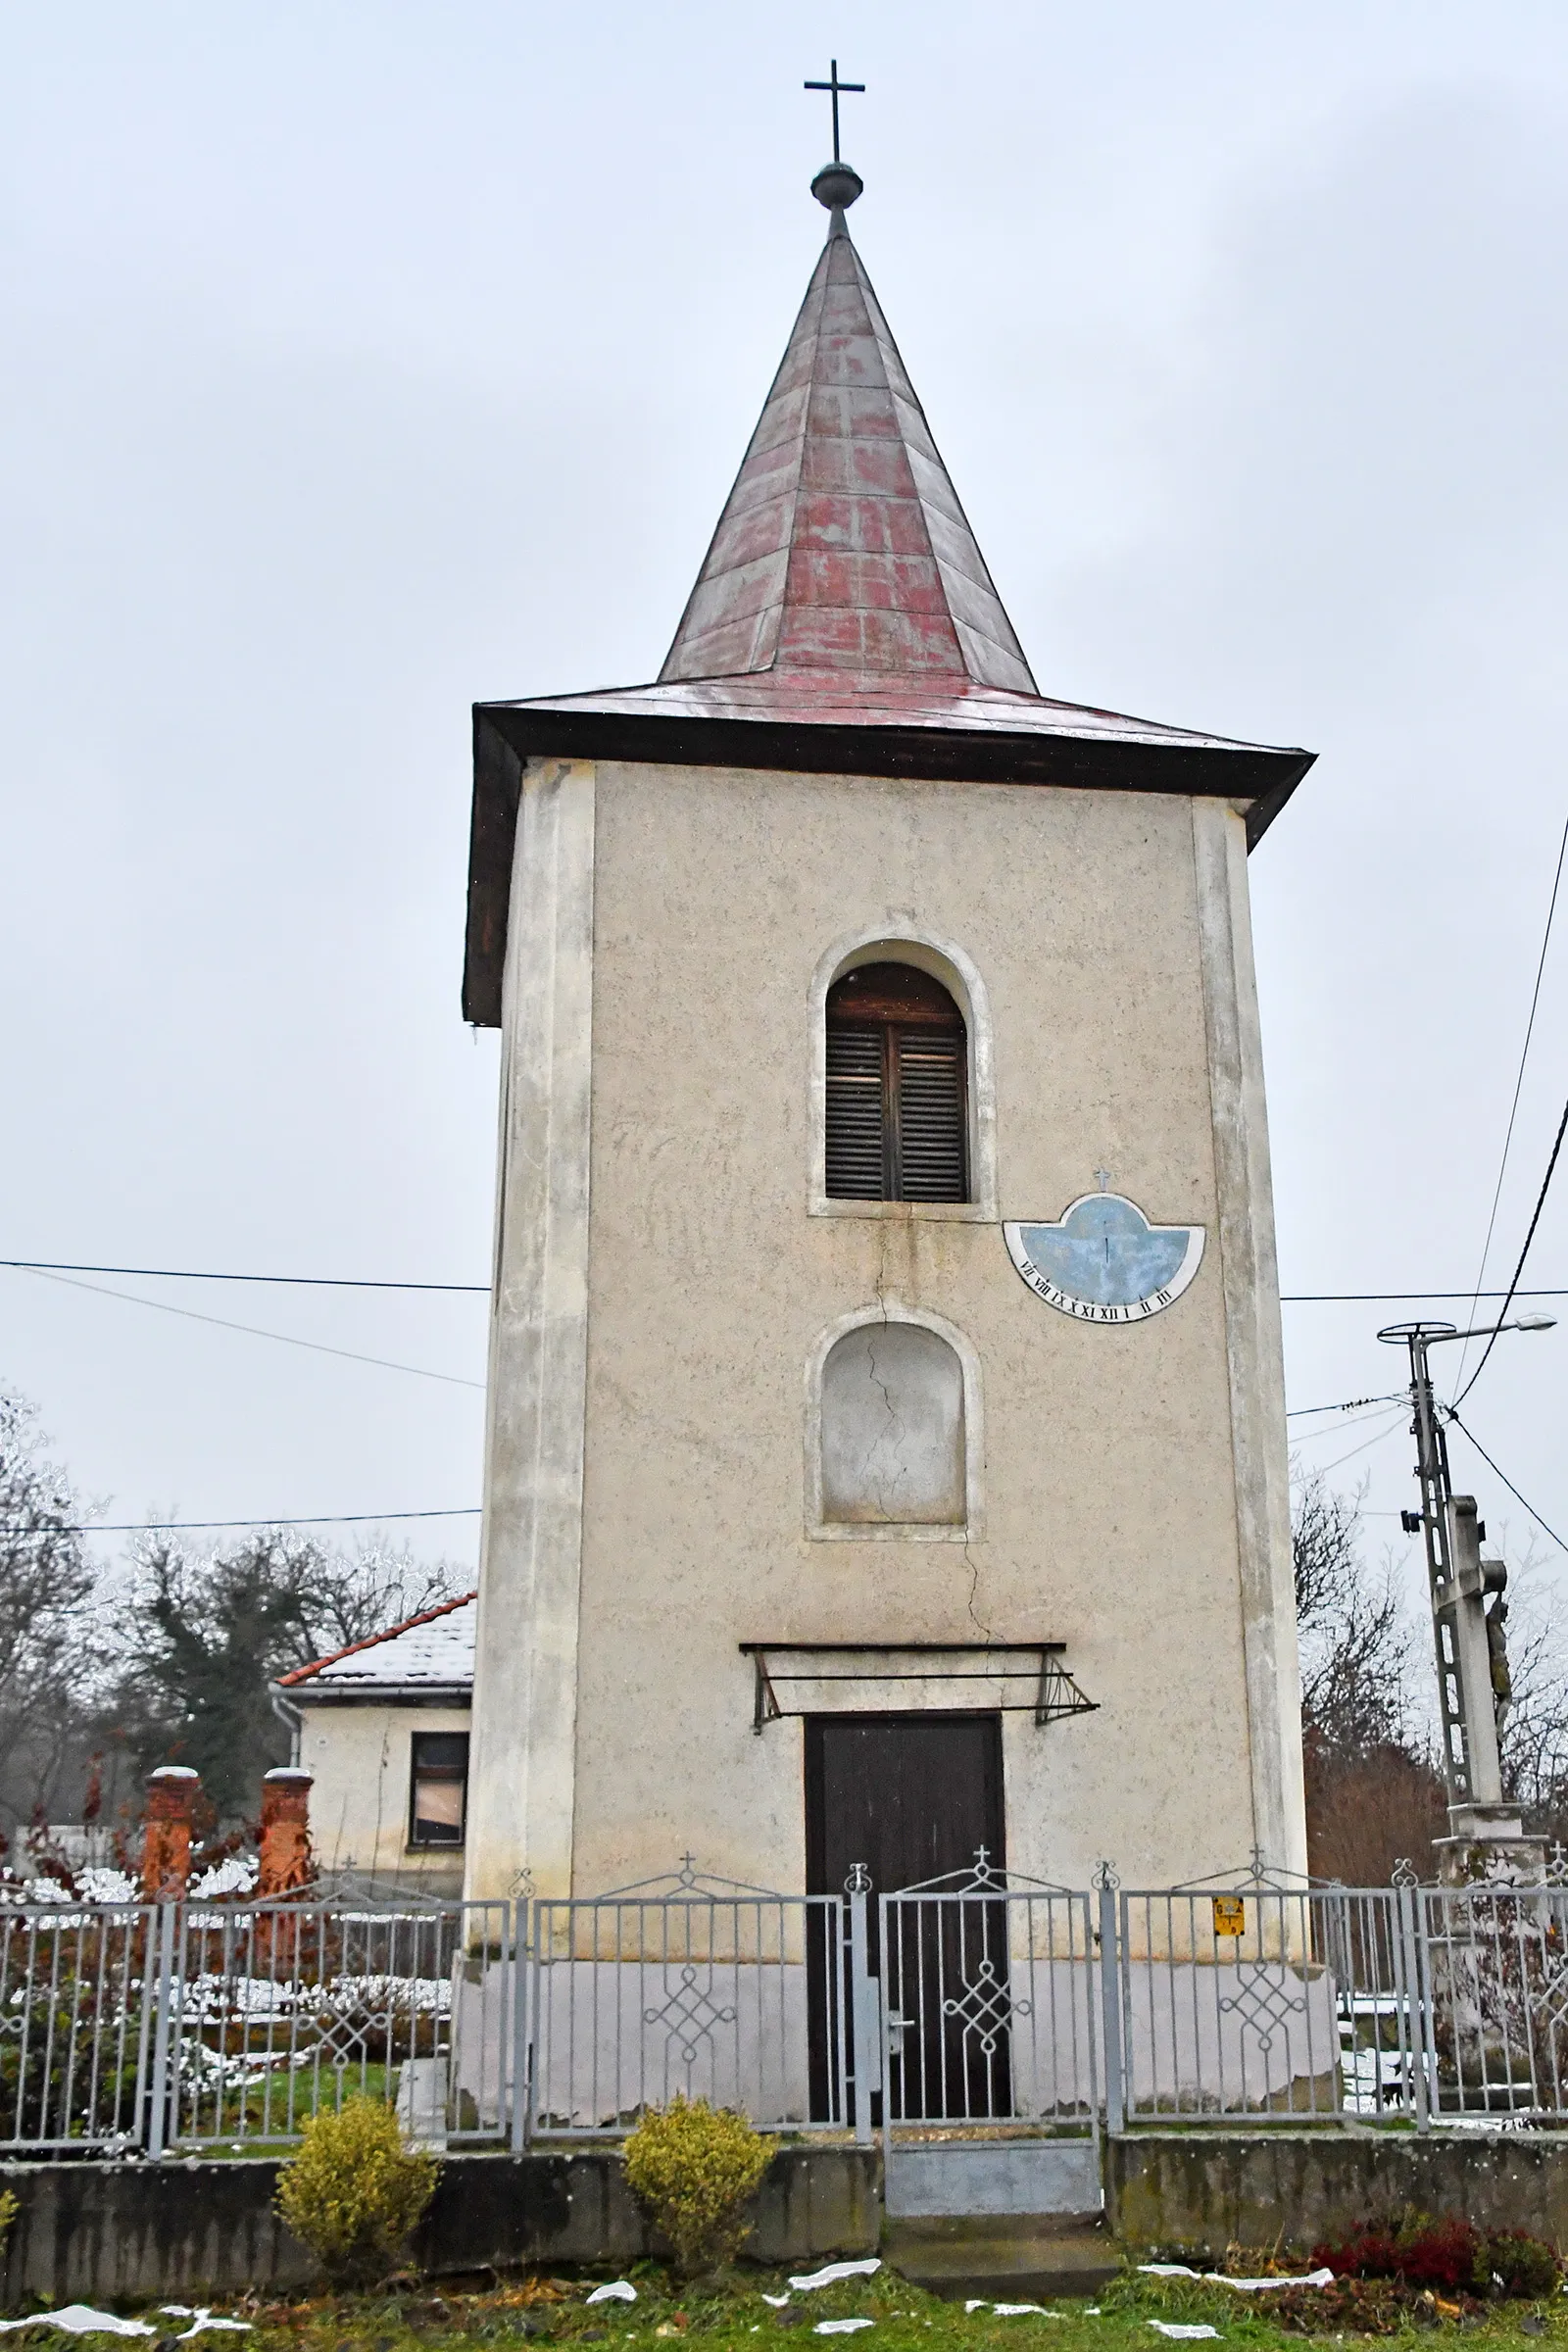 Photo showing: Roman Catholic bell tower in Garadna, Hungary, said to be remnants of a medieval church